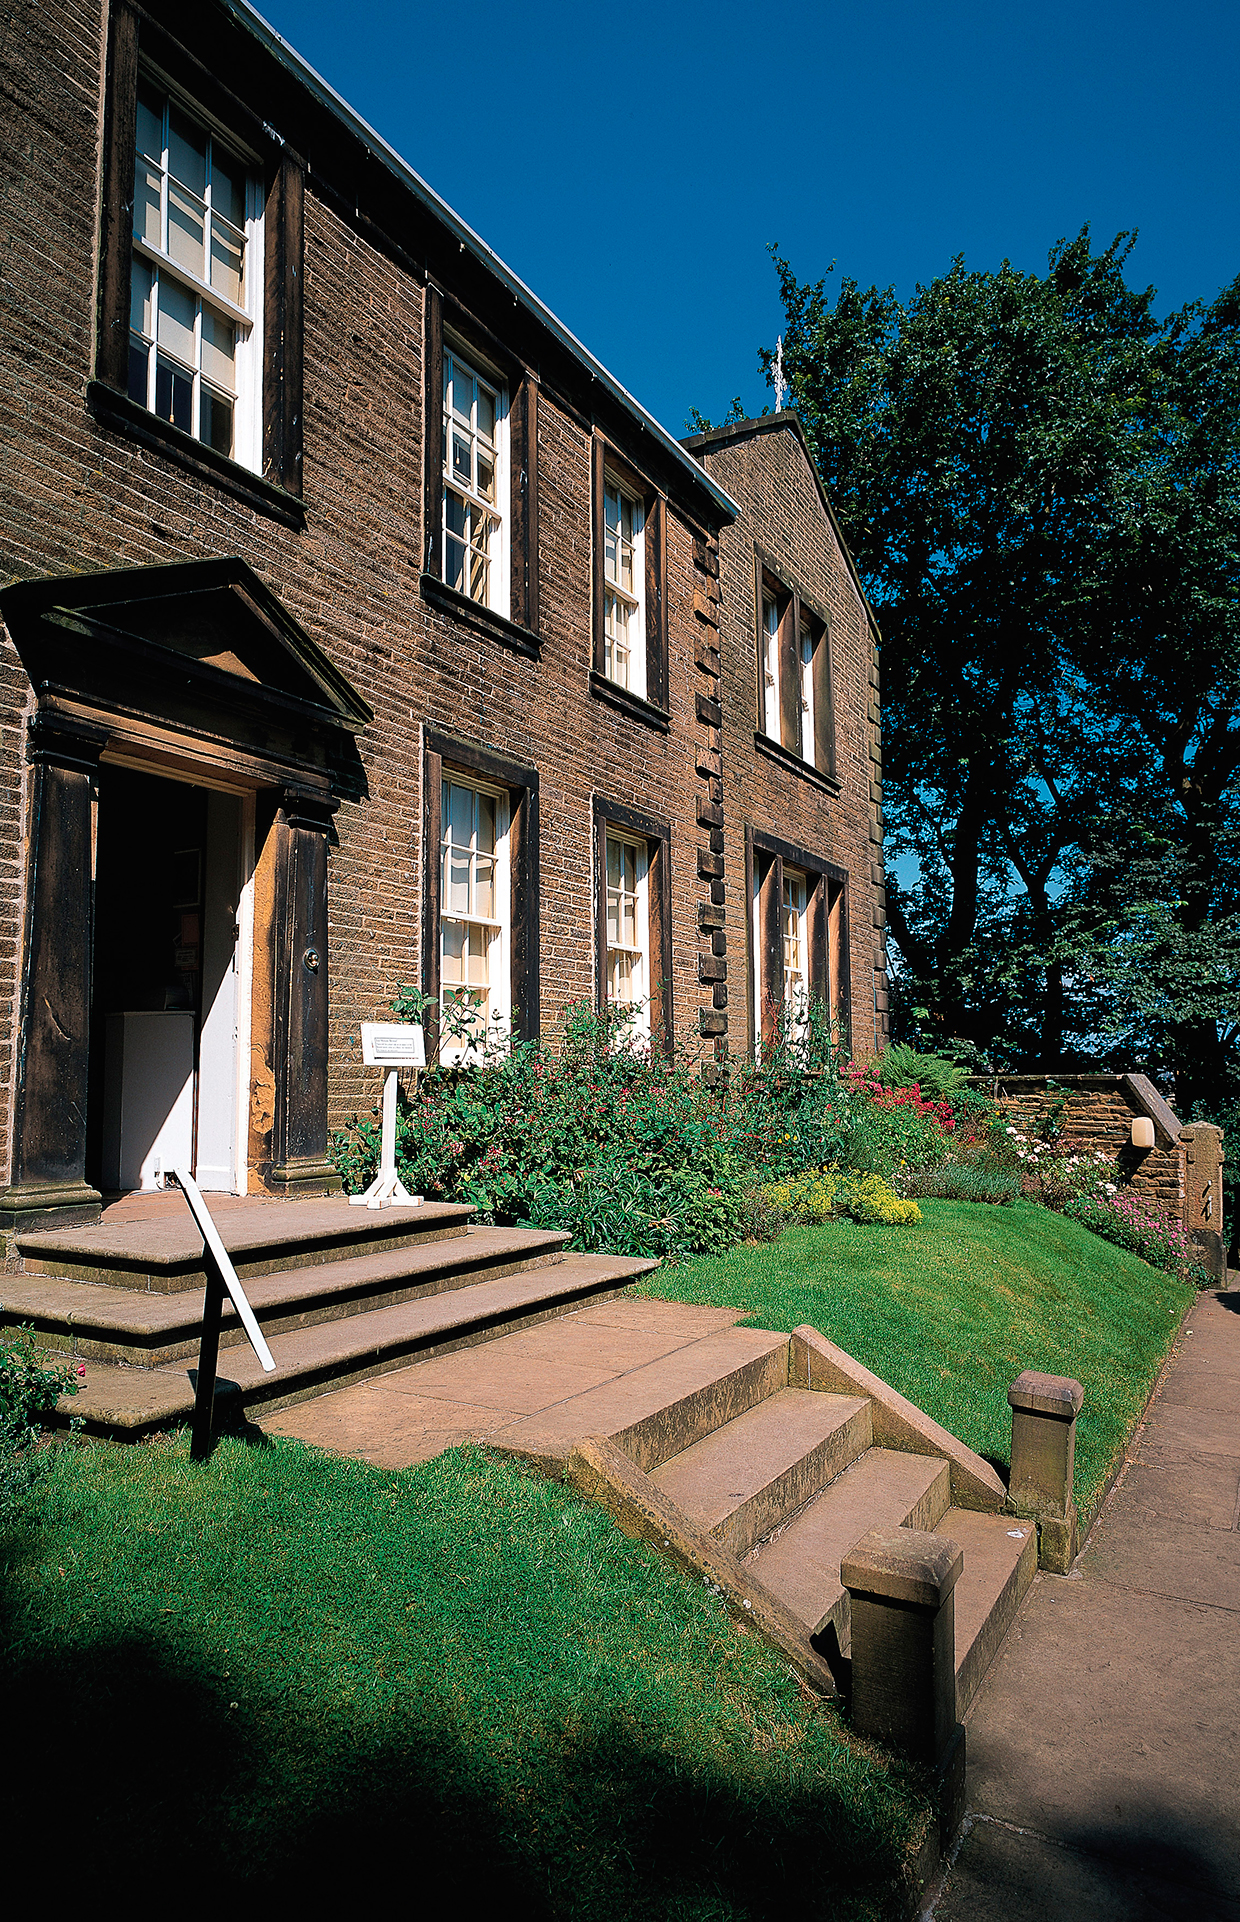 The Parsonage in Haworth, Yorkshire, the Brontë's home, is now a museum.